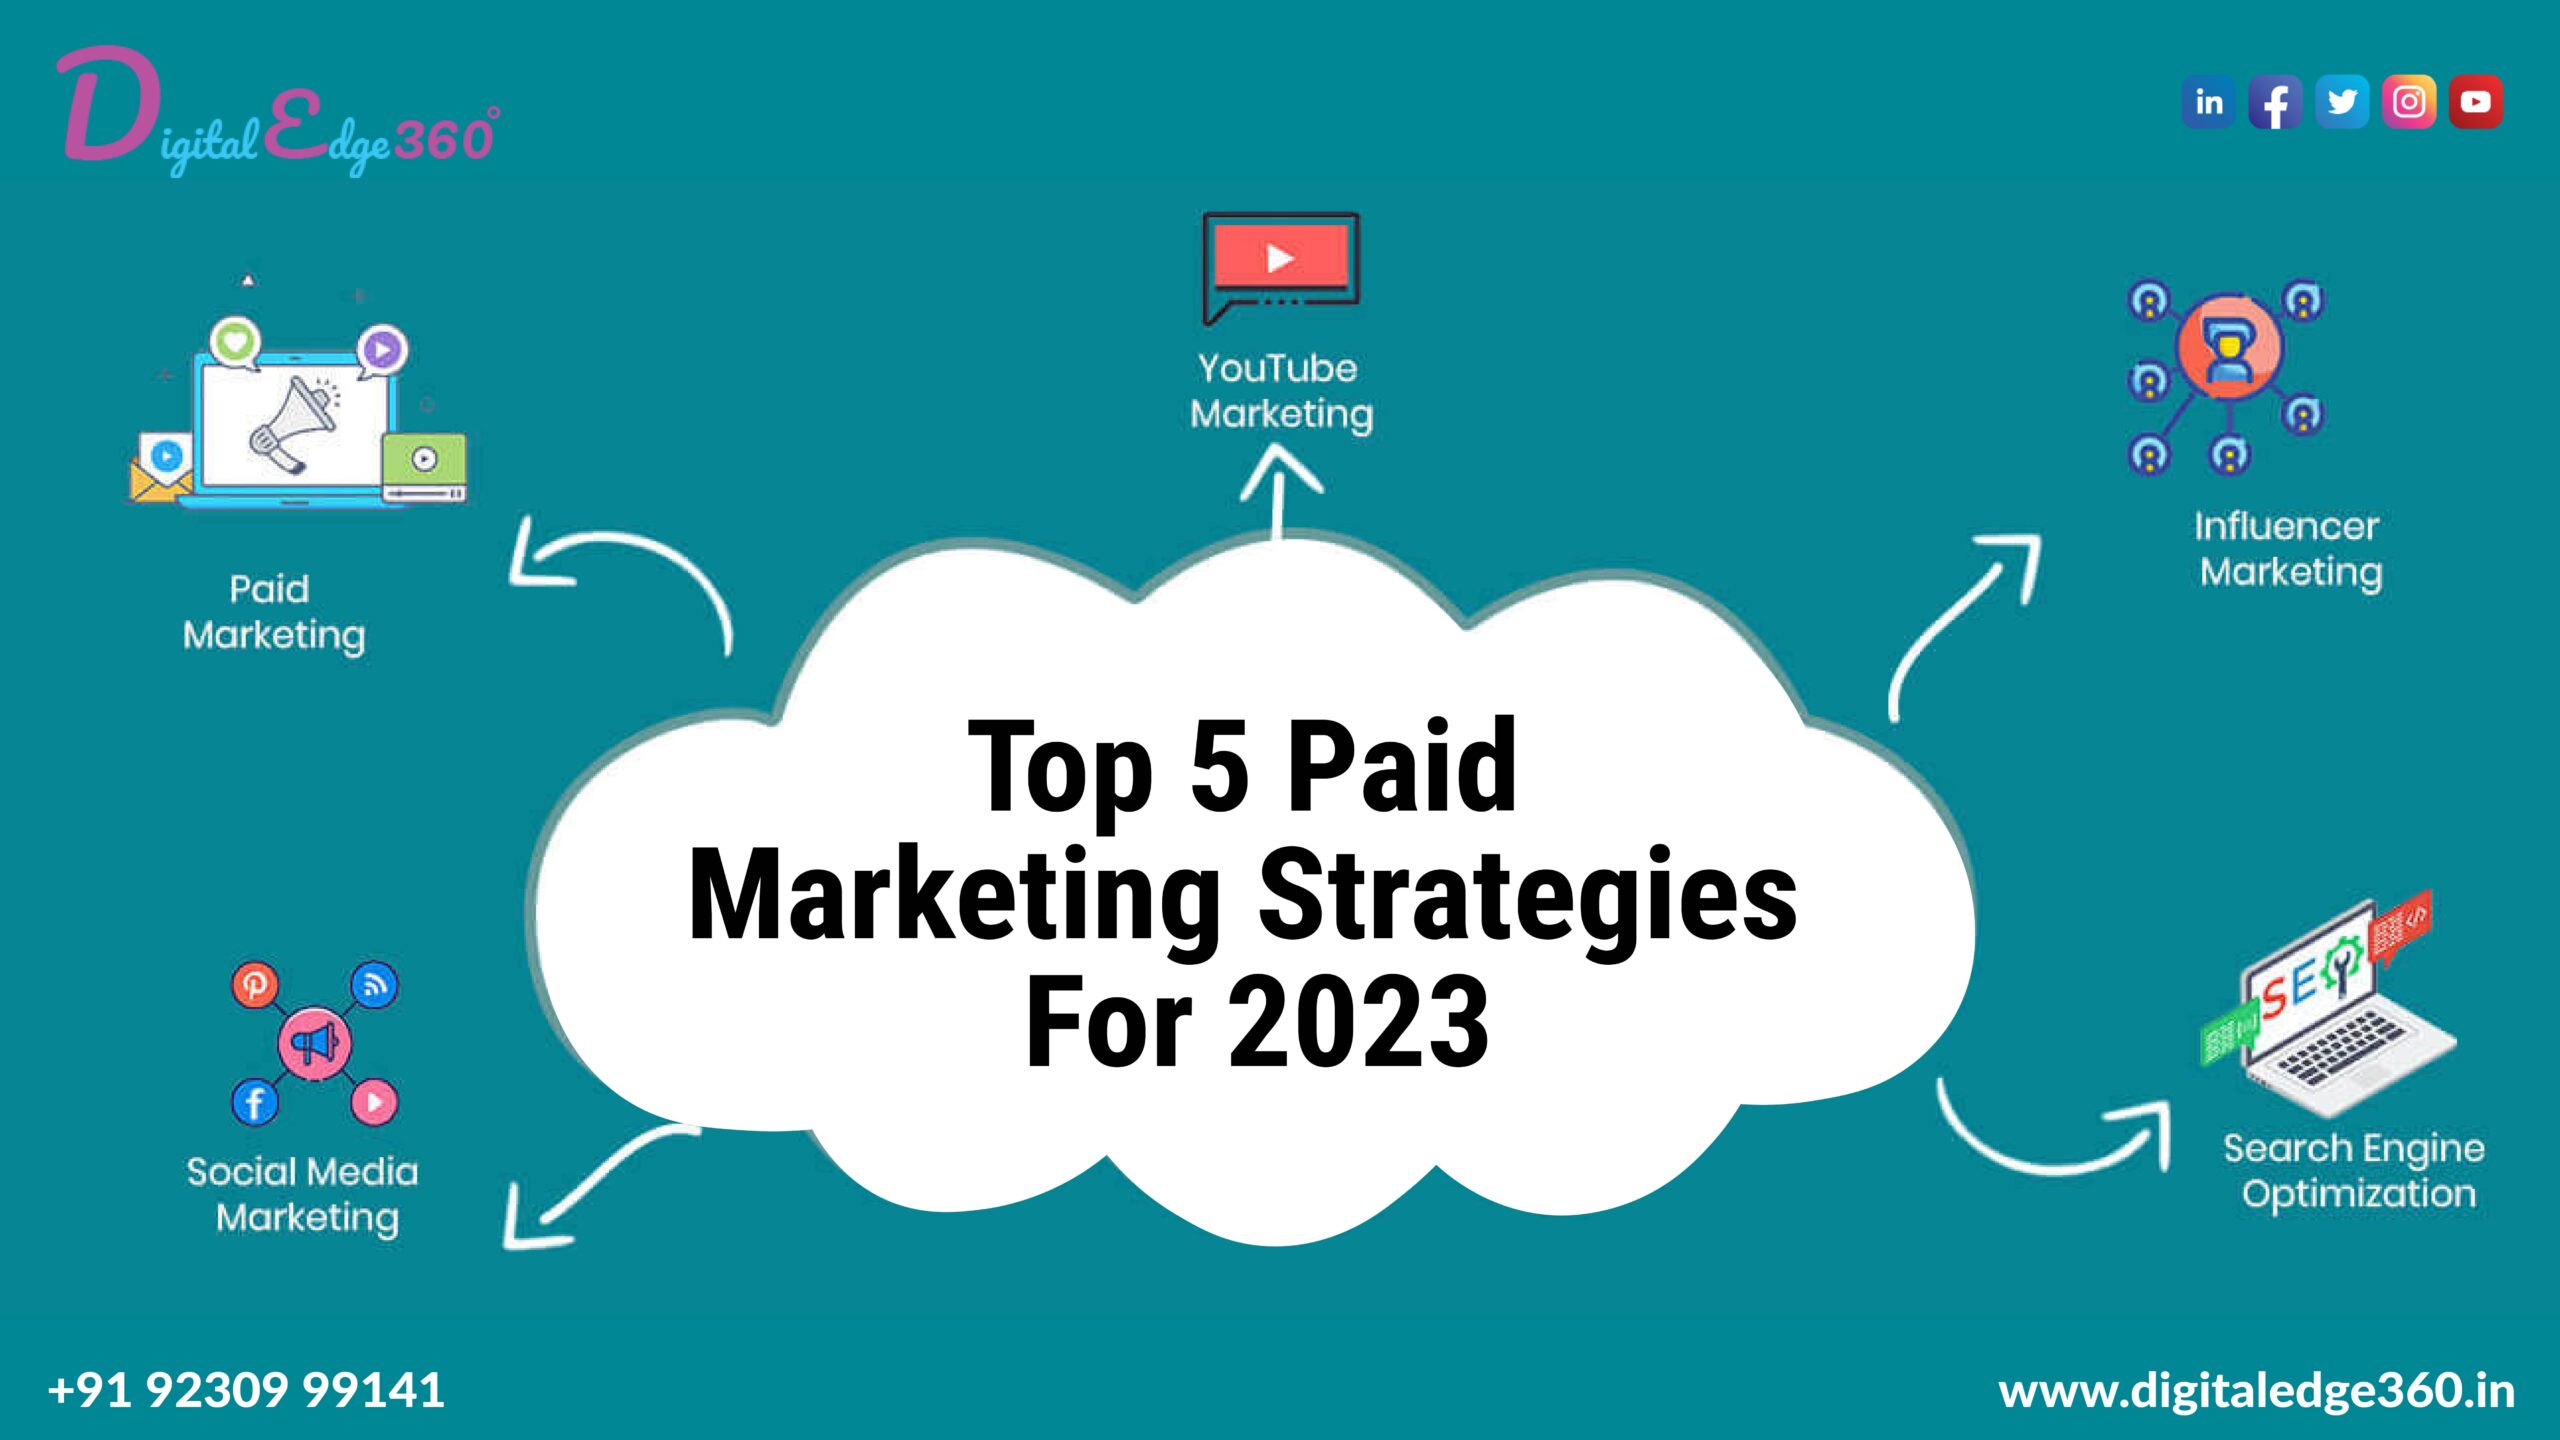 Top 5 Paid Marketing Strategies For 2023